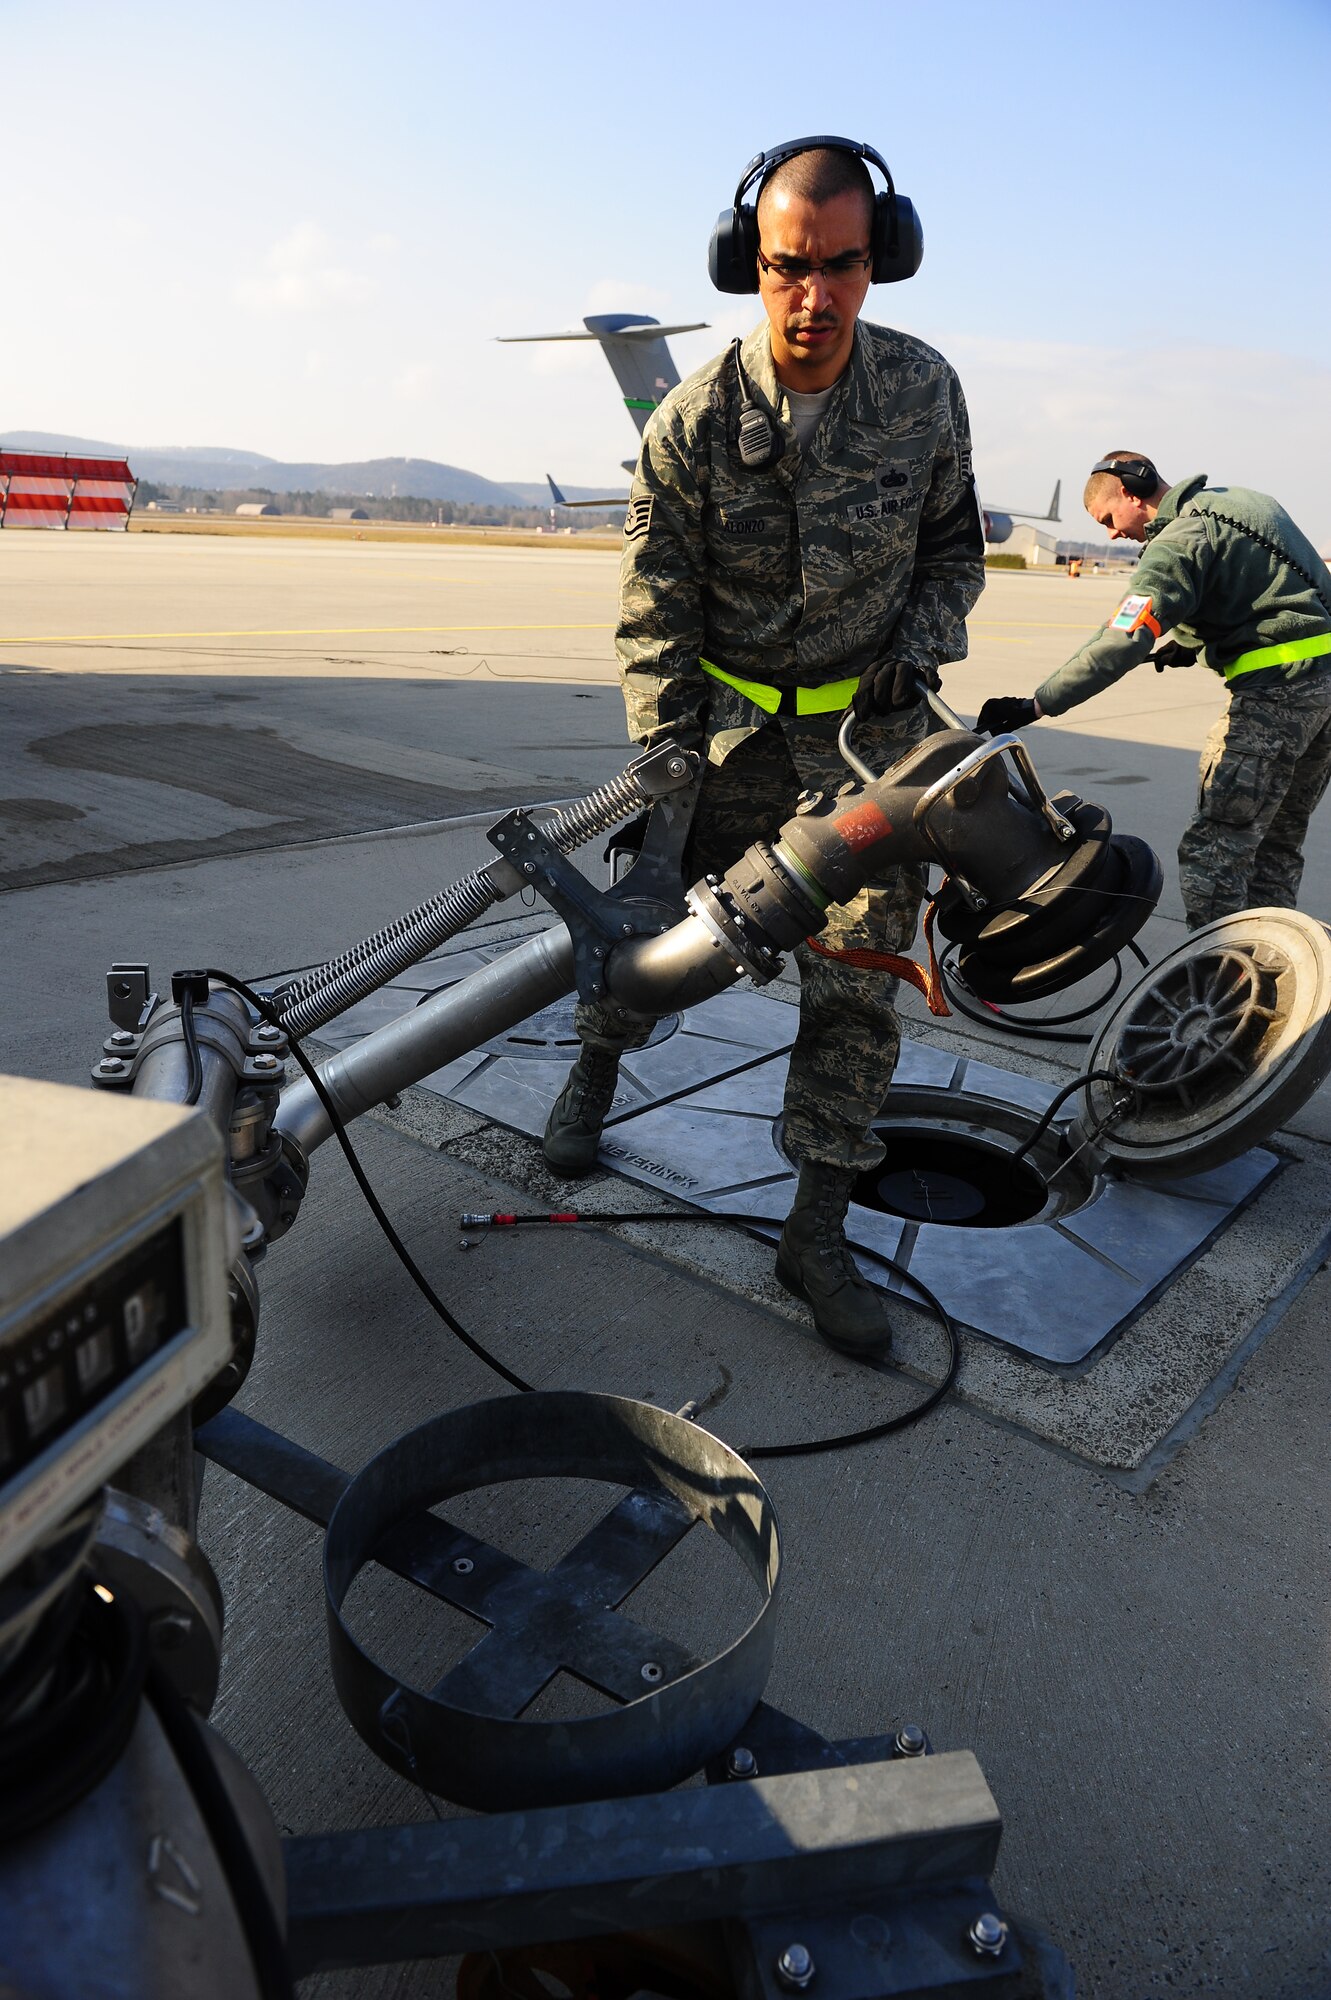 U.S. Air Force Staff Sgt. Jason Alonso and Airman 1st Class Ryan Lee, 86th Logistics Readiness Squadron fuels distribution mobile operators, reconfigure a fueling pantograph to remove it after refueling a C-17 Globemaster III, Ramstein Air Base, Germany, March 6, 2012. Airmen assigned to the fuels management flight issued more than 130 million gallons of fuel in fiscal year 2011.  (U.S.Air Force photo/Airman Brea Miller)